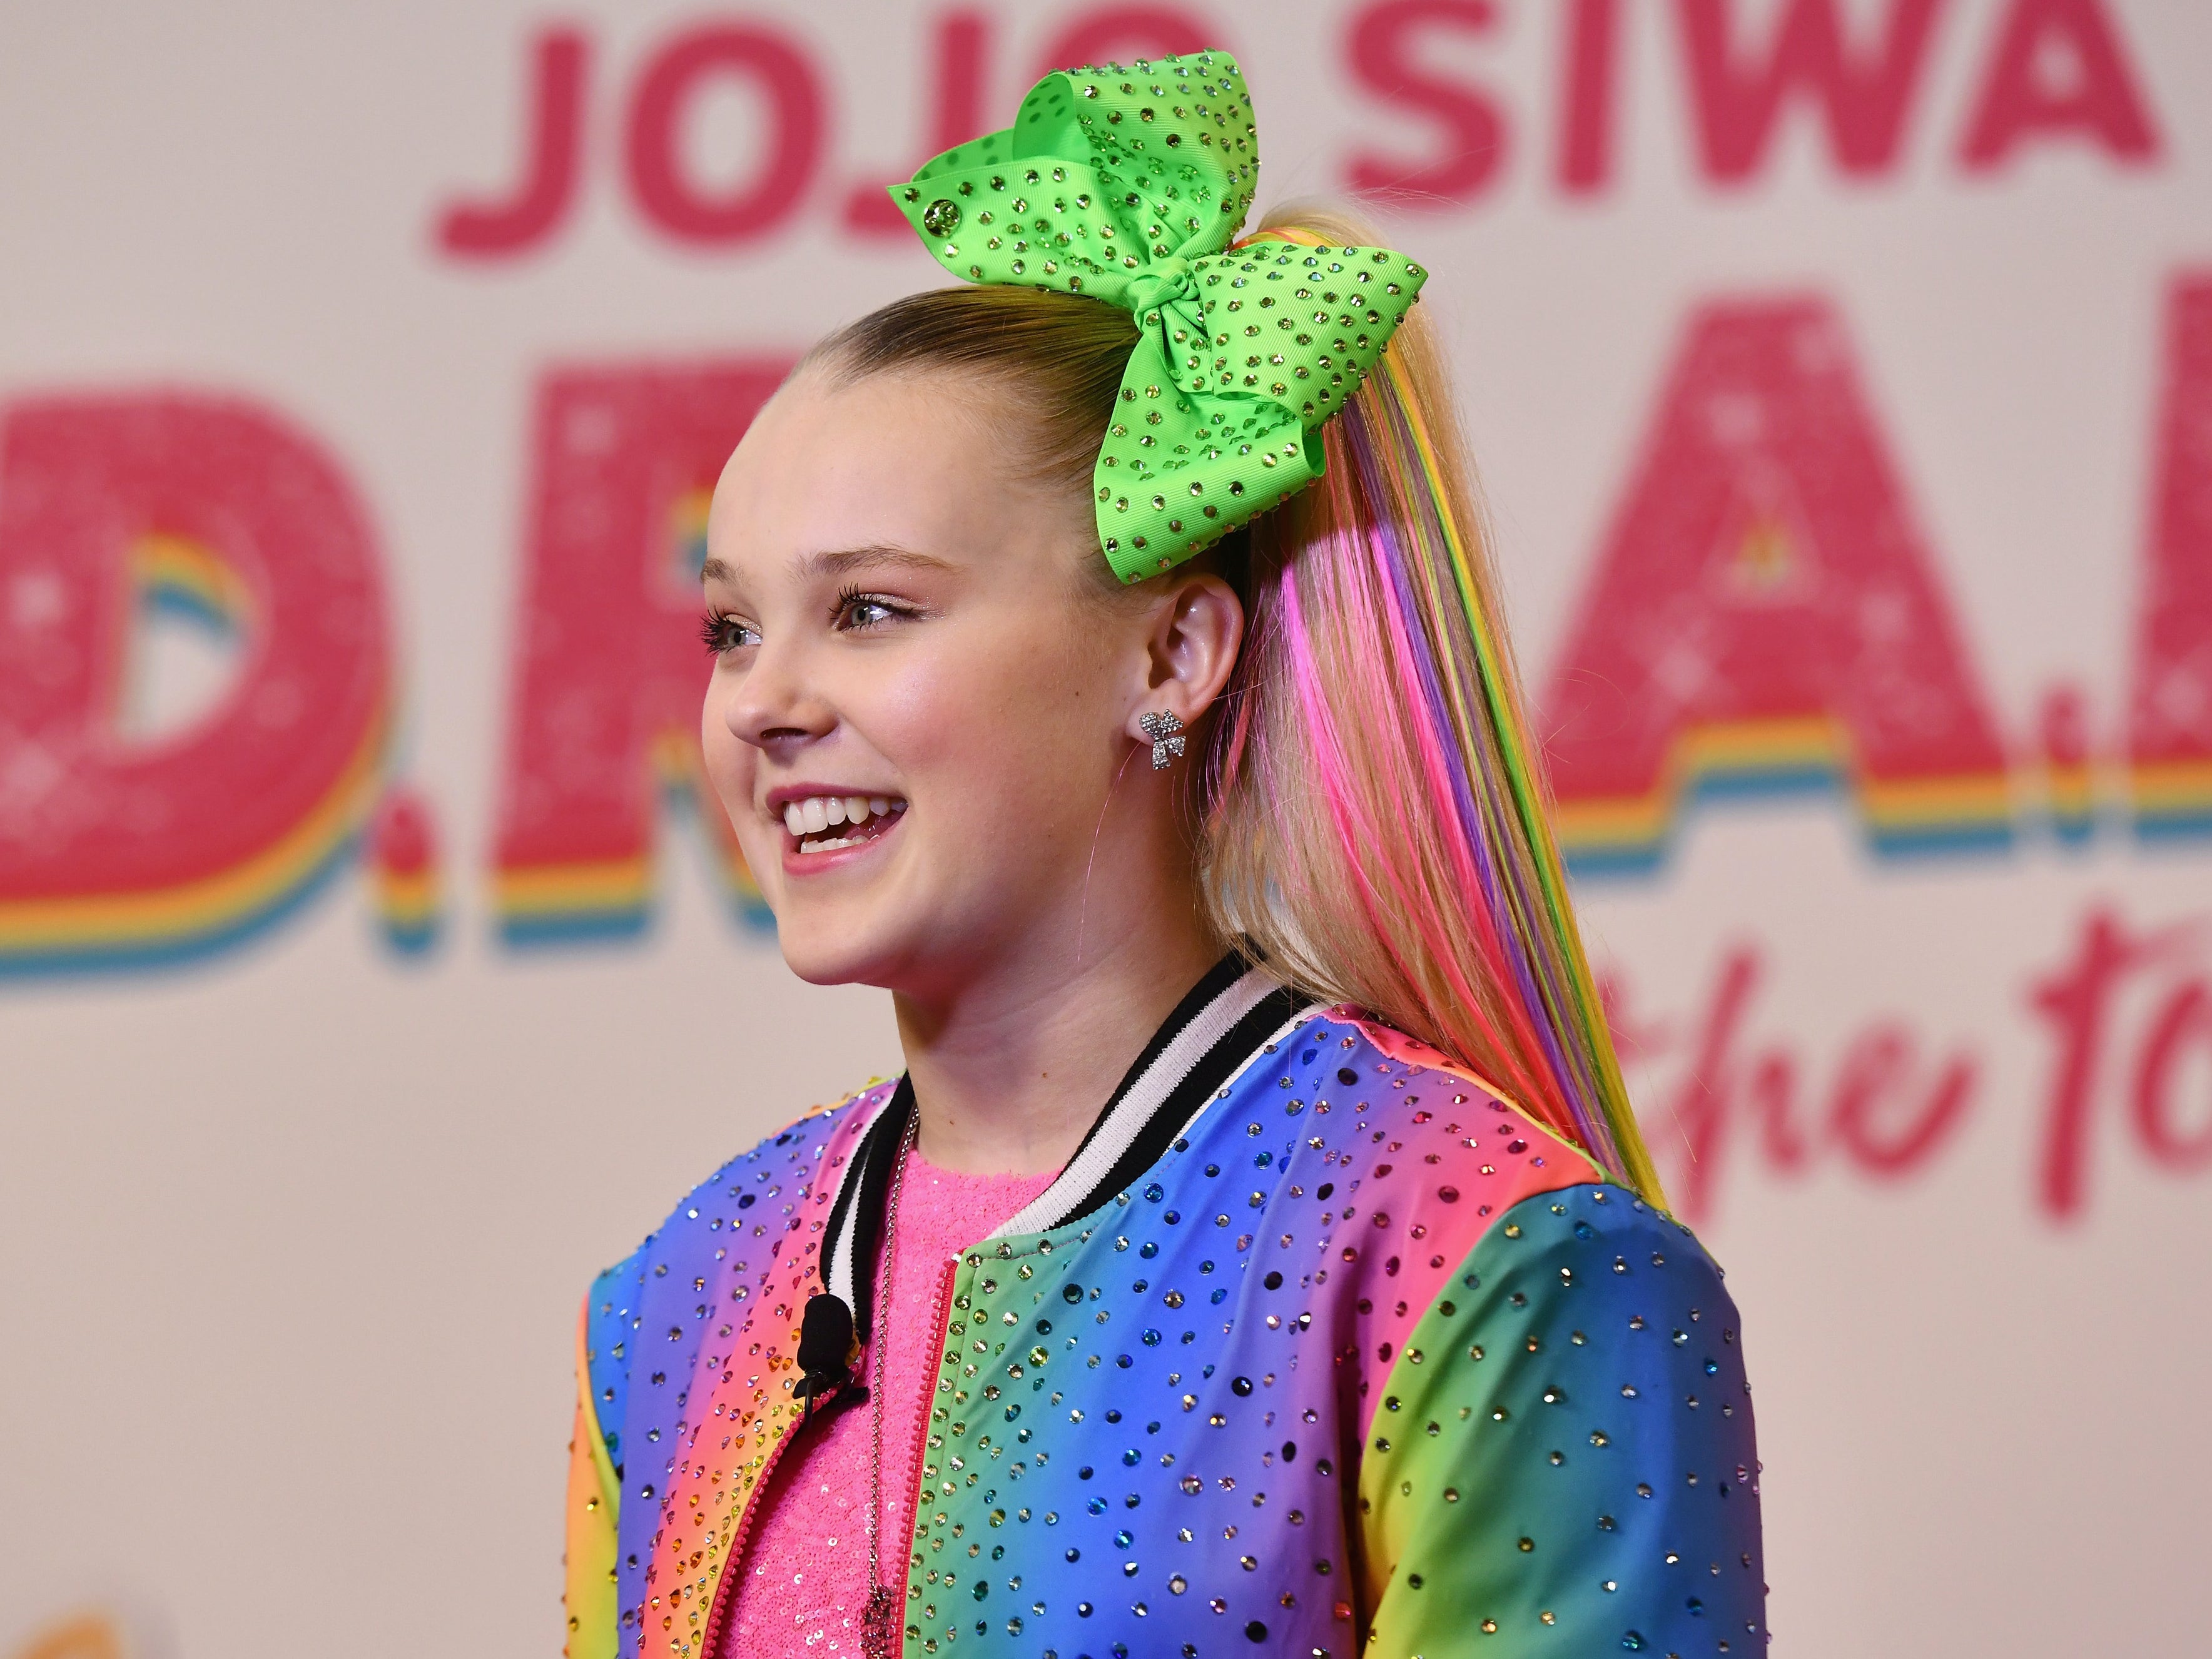 JoJo Siwa appears to come out in